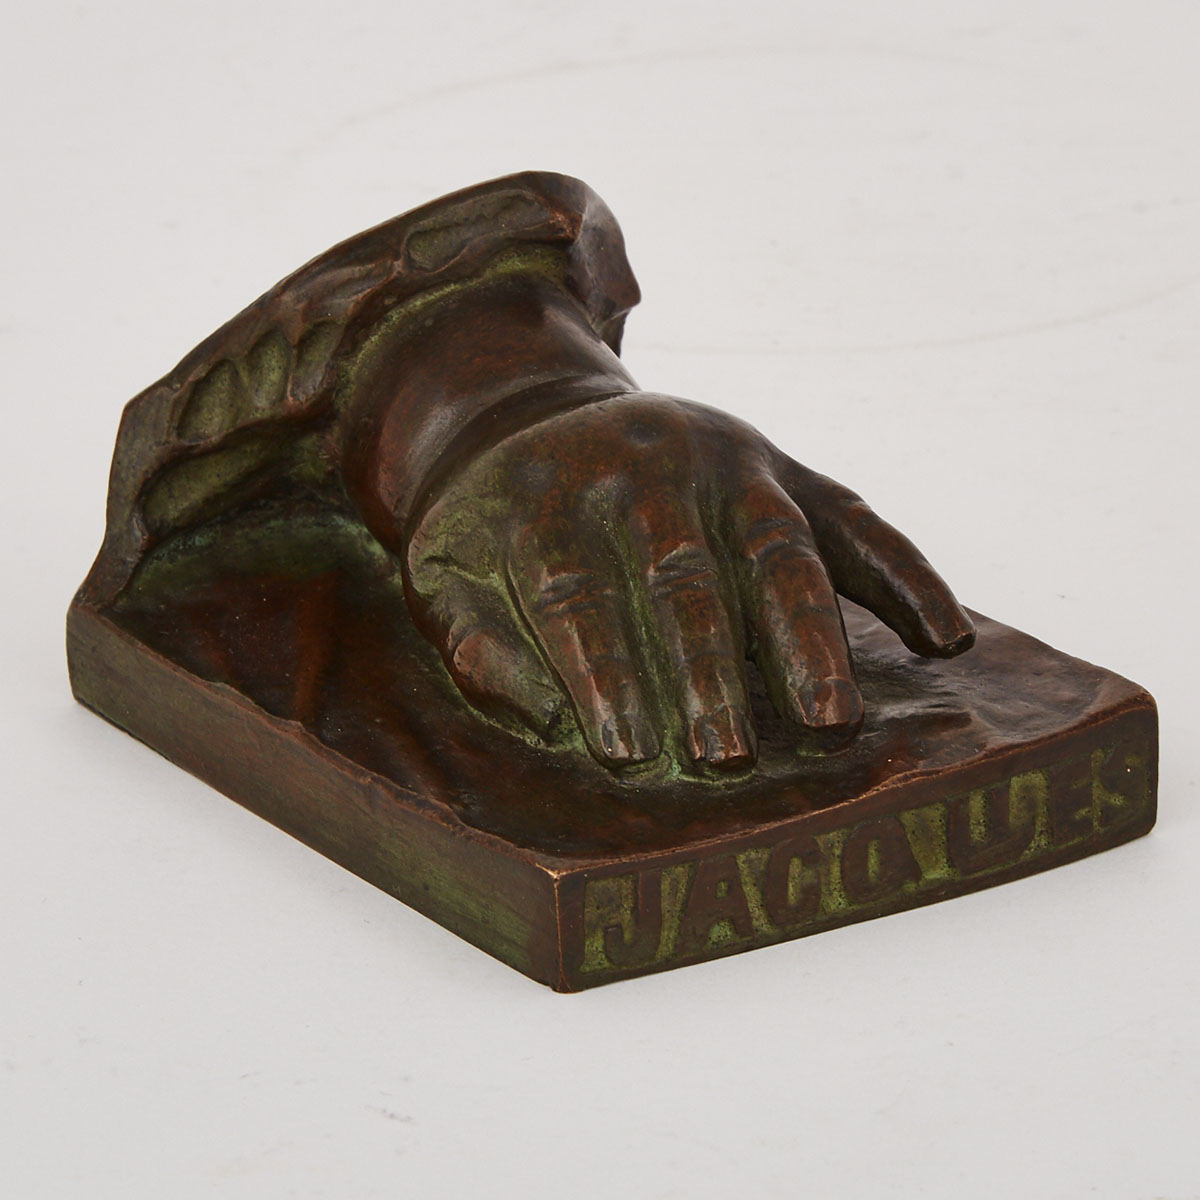 Patinated Bronze Life Cast Model of a Child’s Hand, c.1900